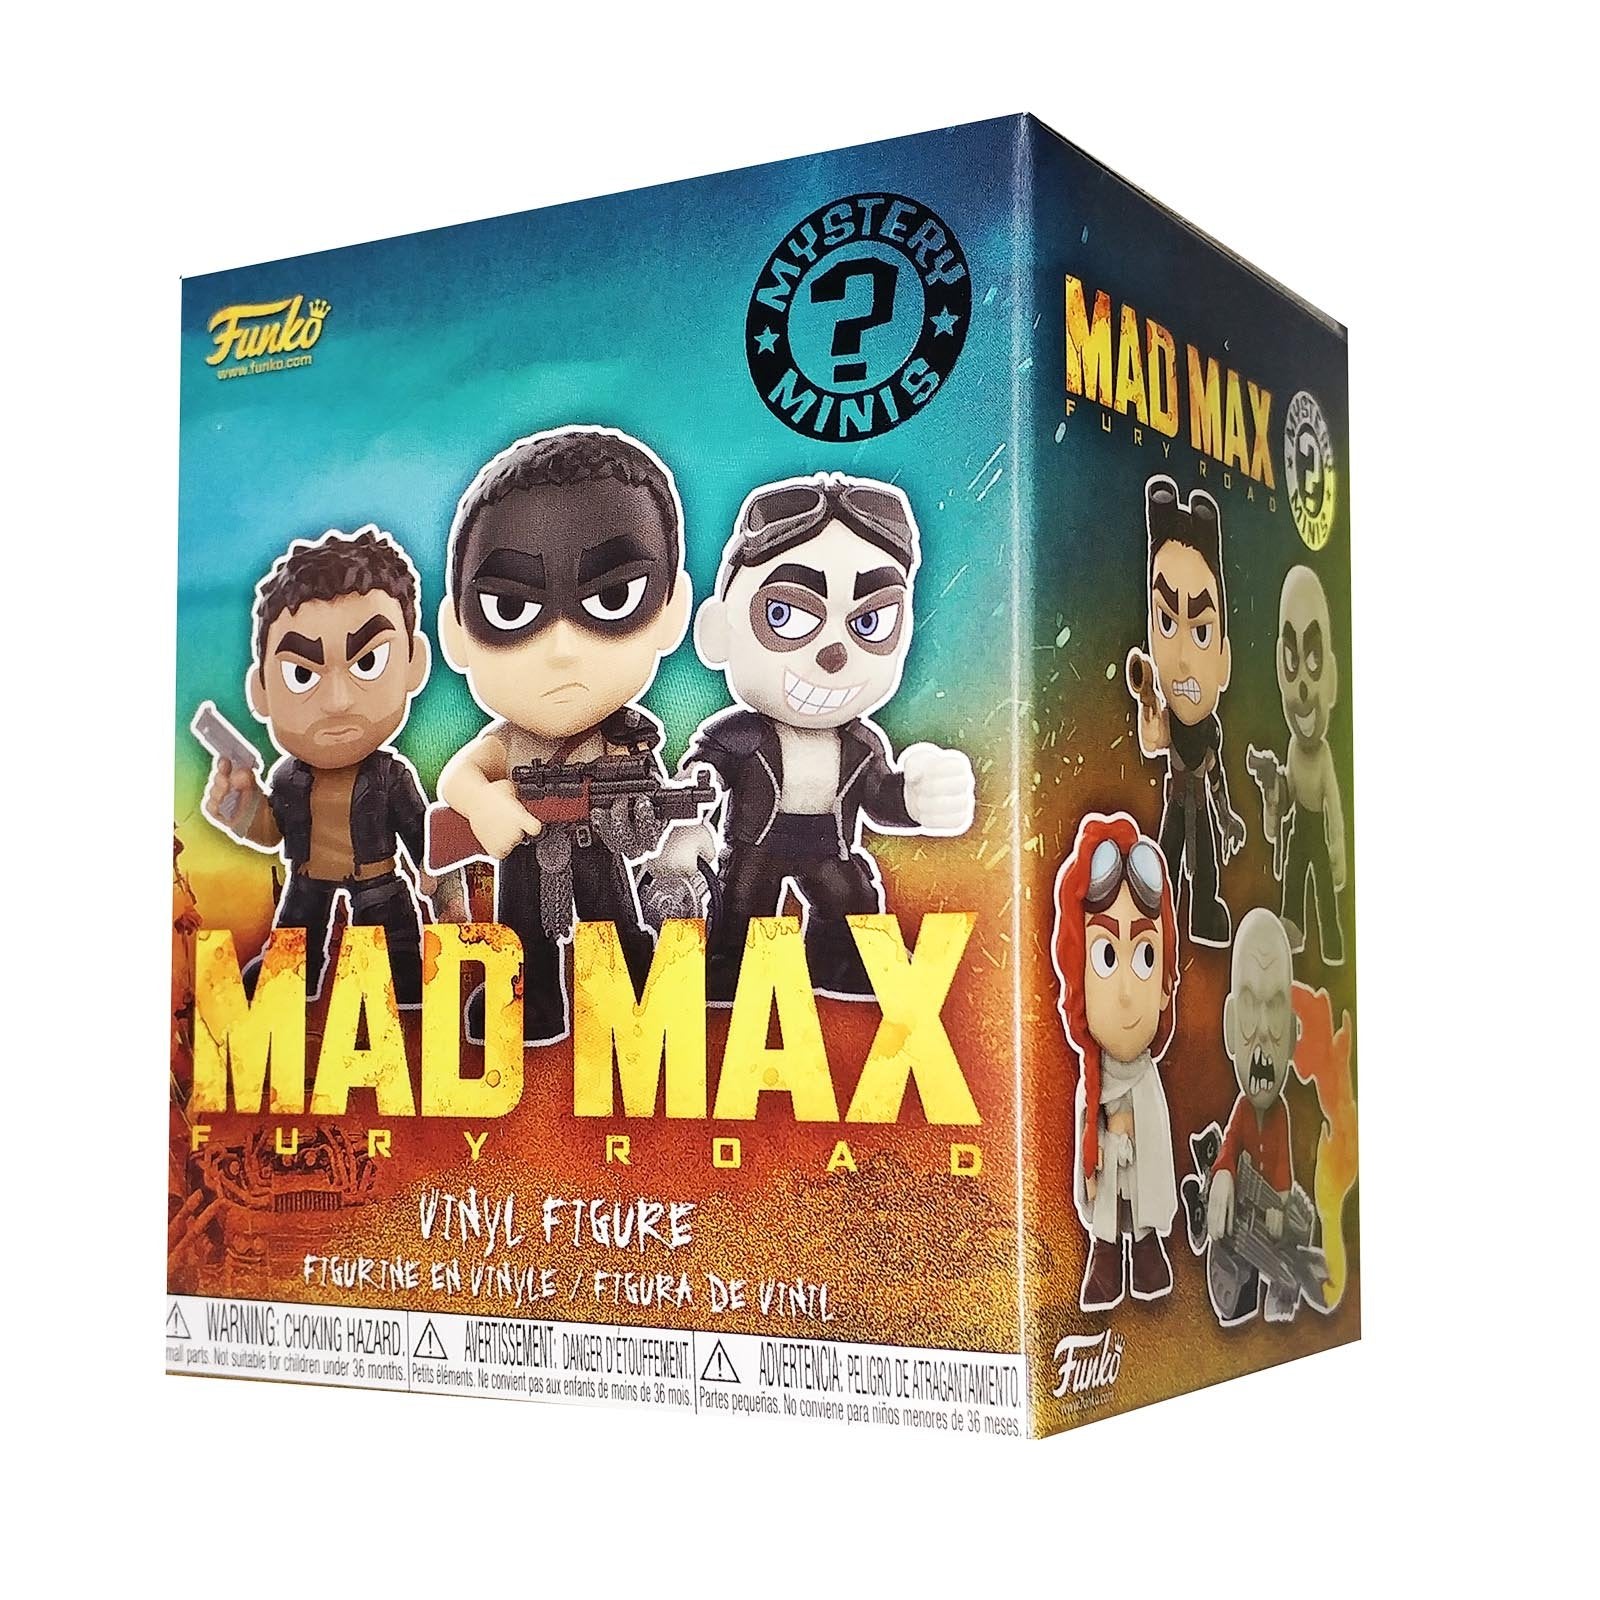 mad max mystery minis